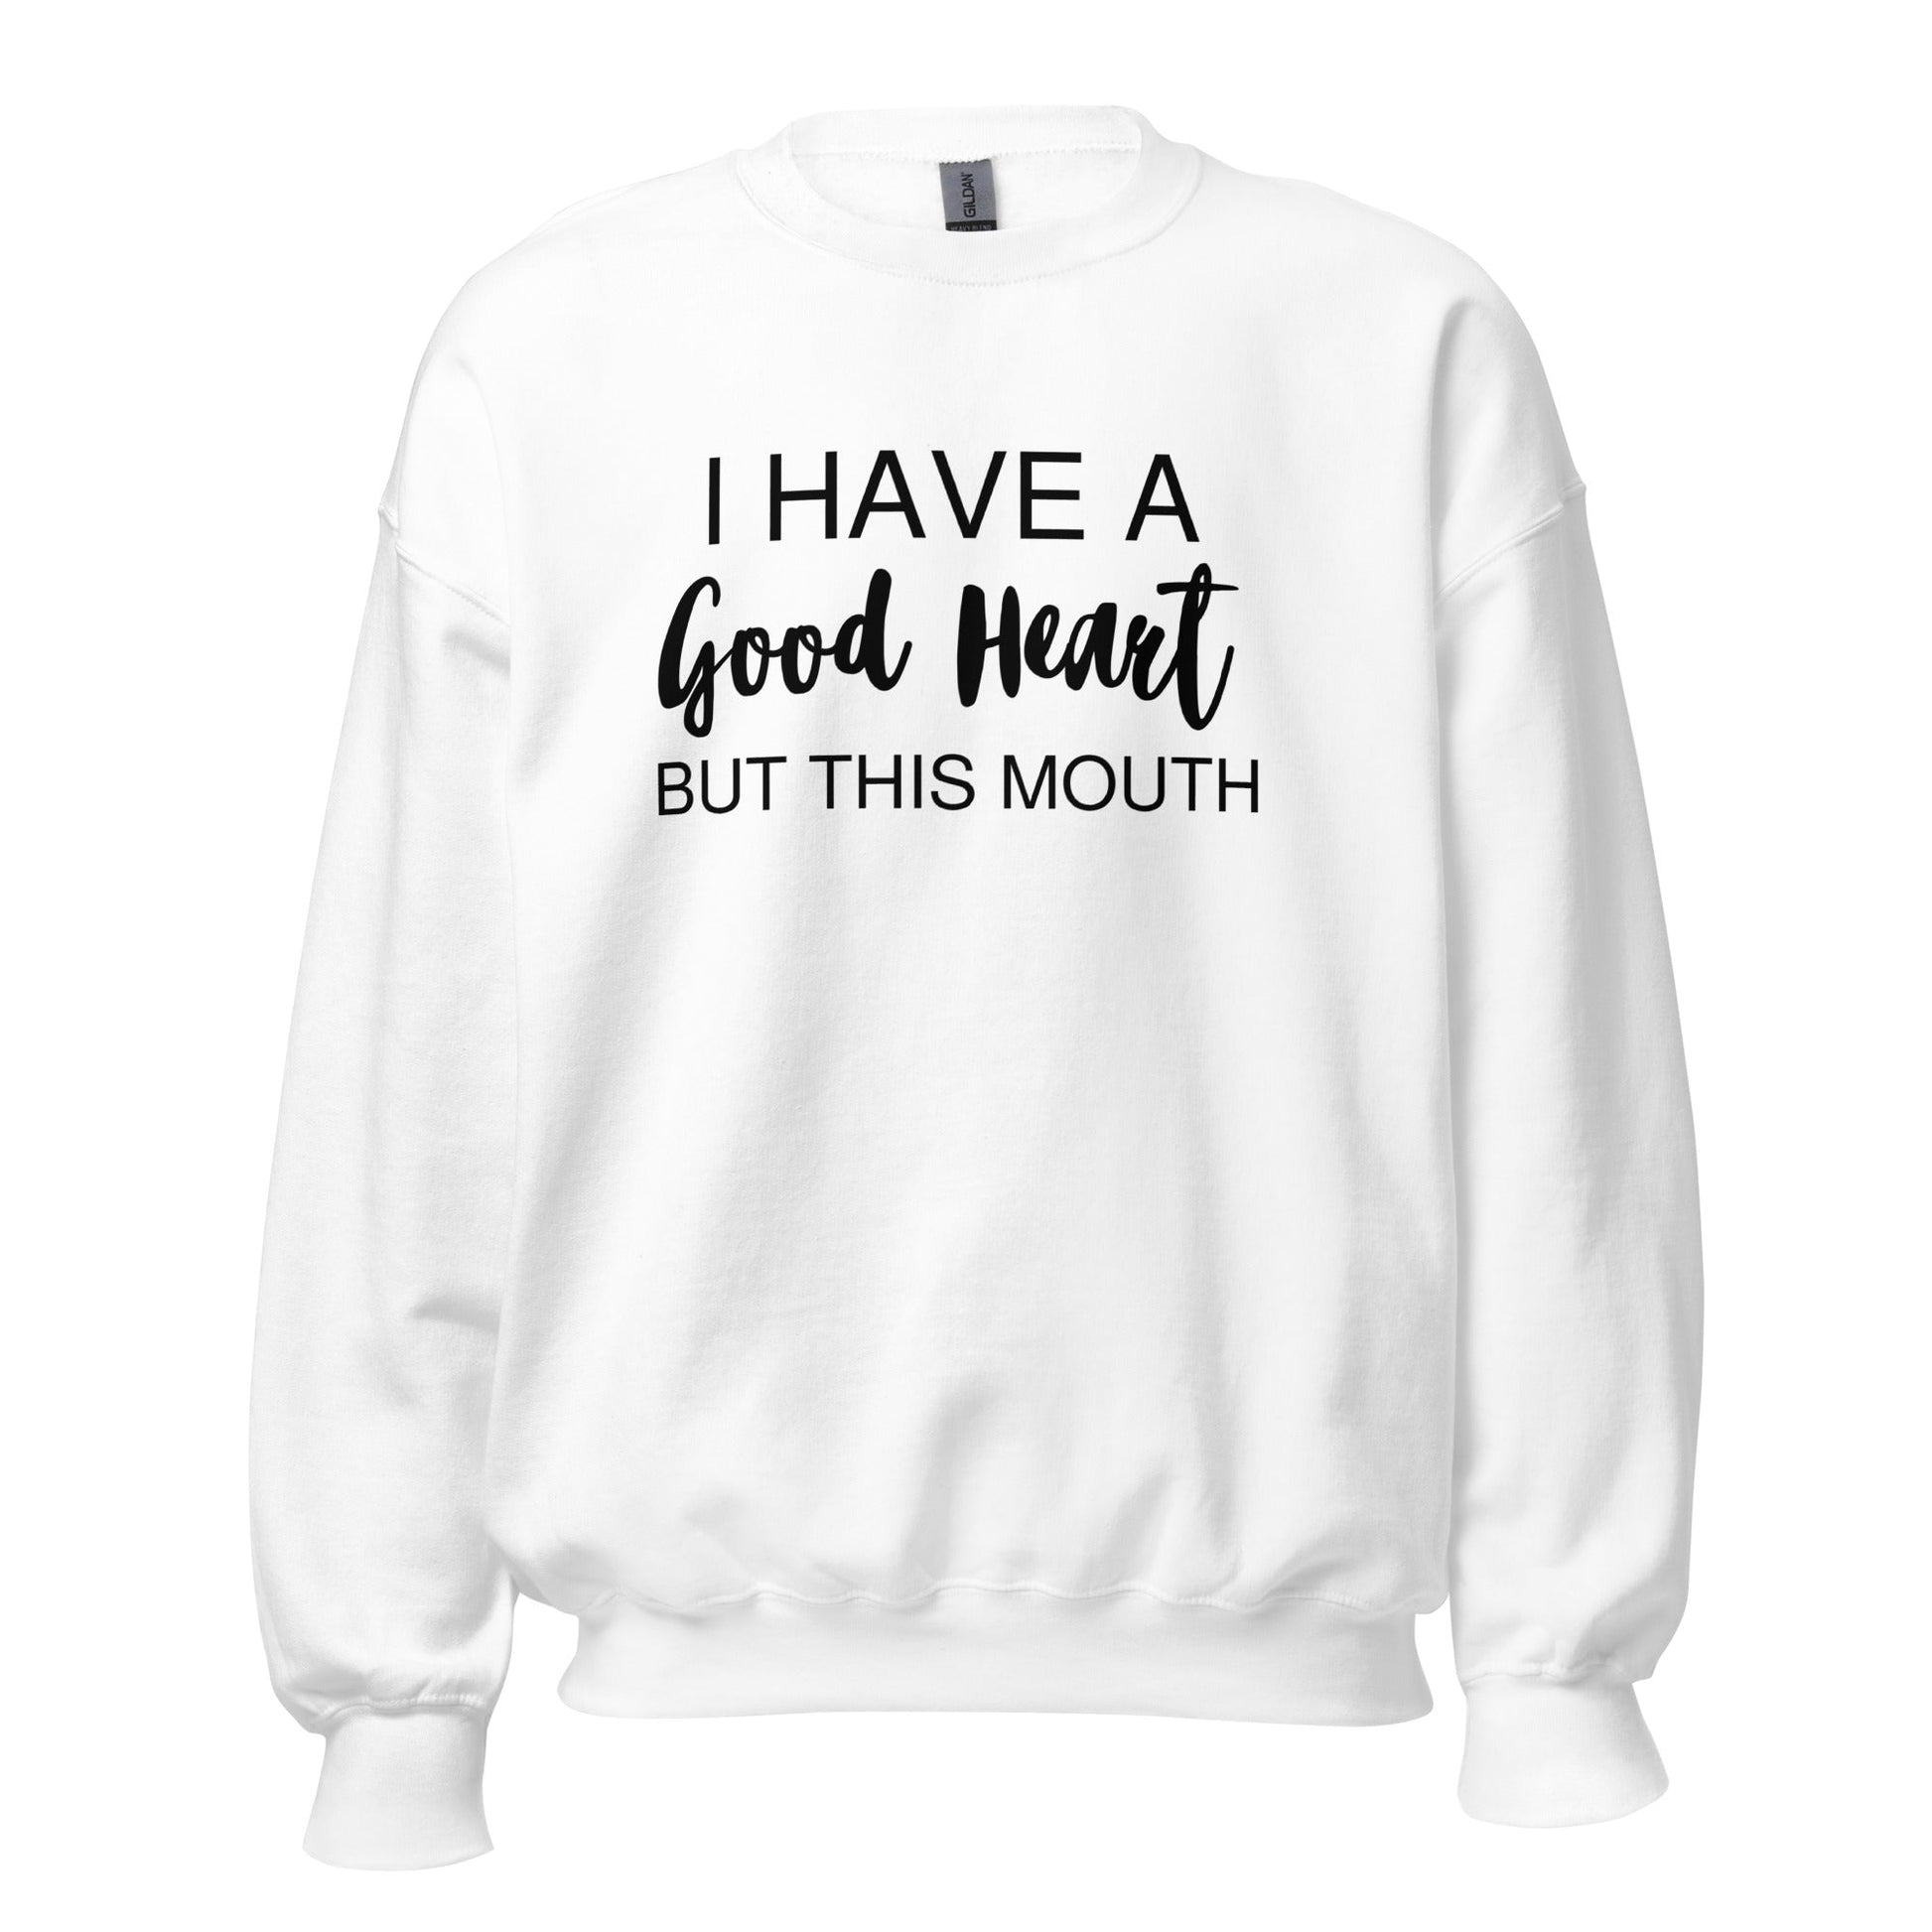 I Have A Good Heart But This Mouth Unisex Sweatshirt - Catch This Tea Shirts